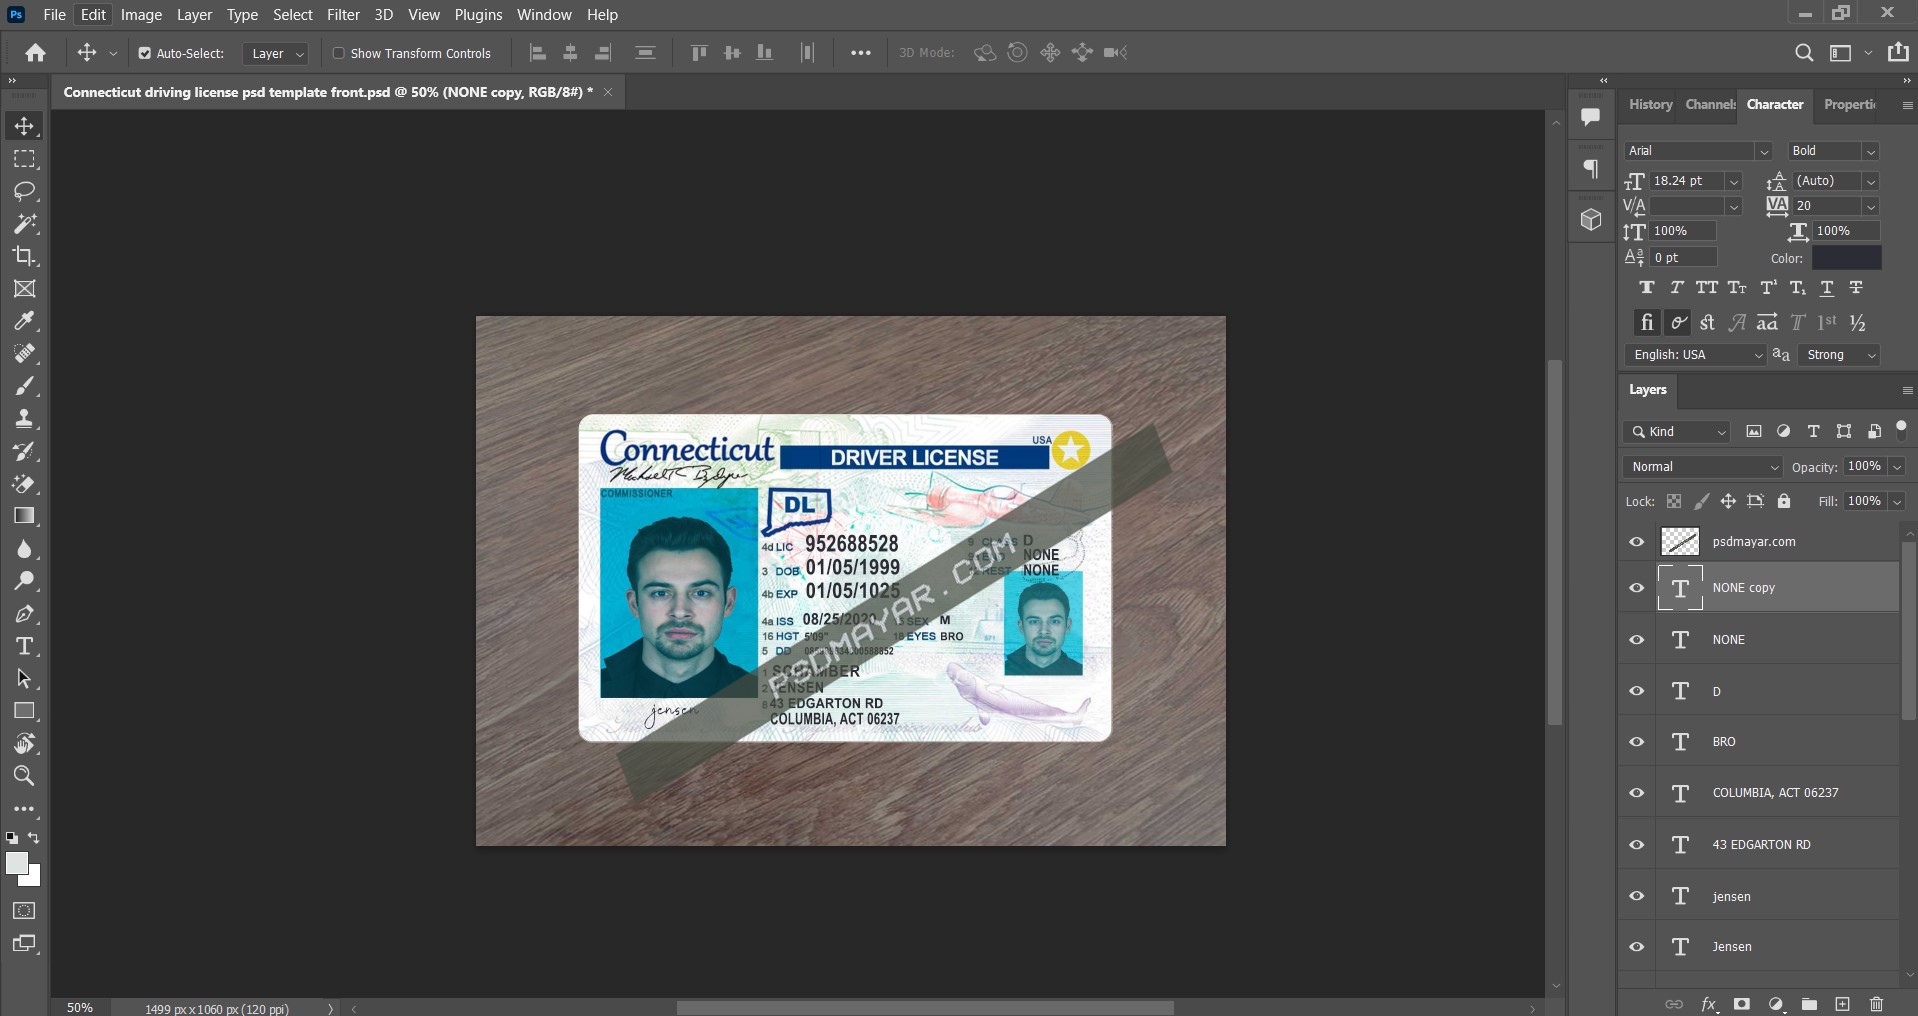 Connecticut driving license psd template free download